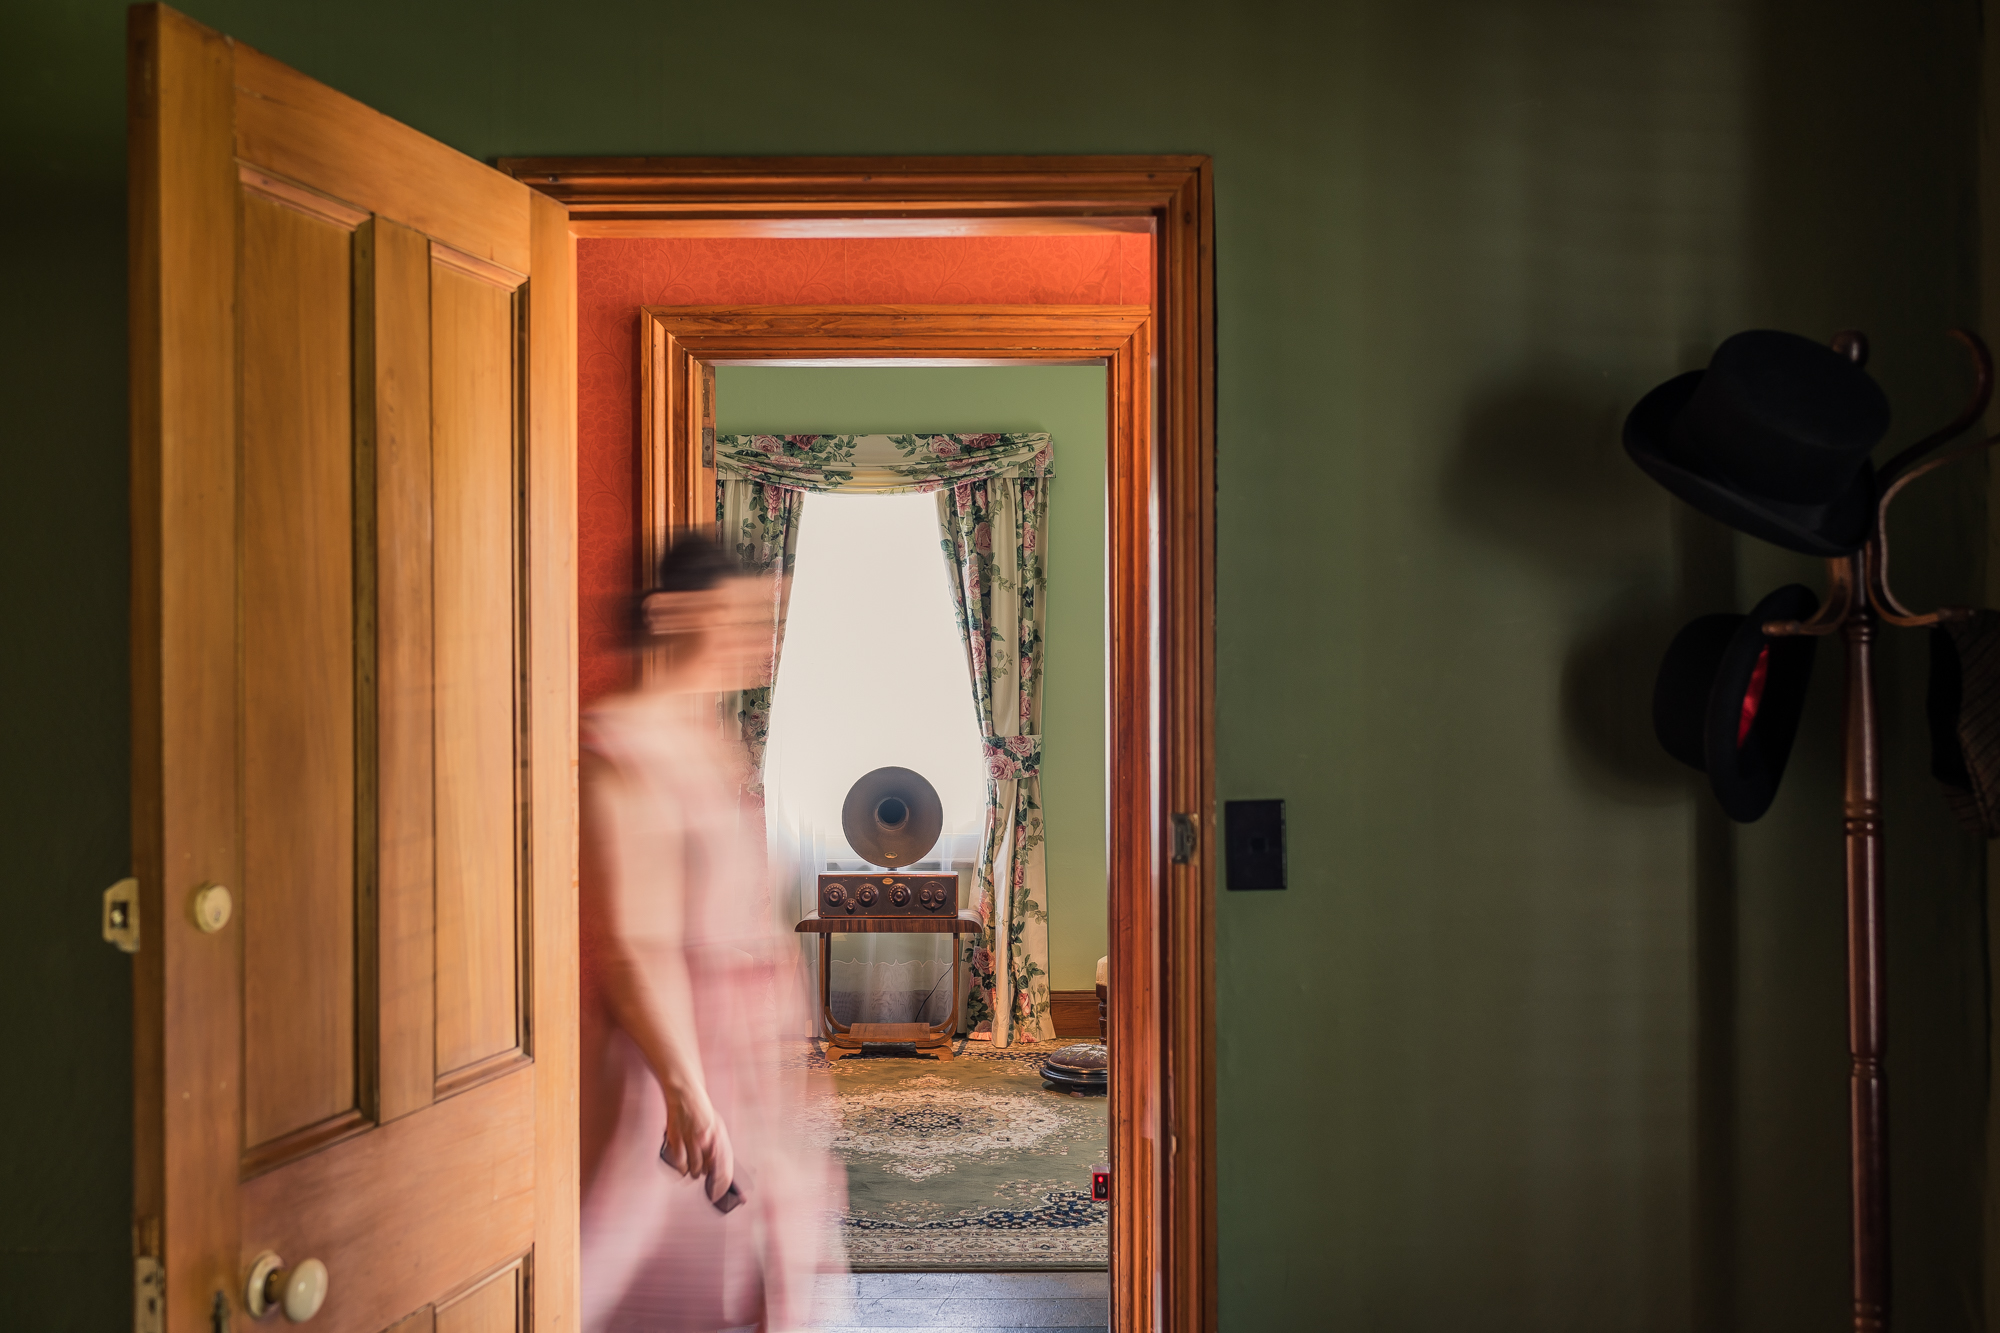 A woman walks along the hallway of Nairn Street Cottage. She is framed by an open bedroom door. She appear blurry with movement.